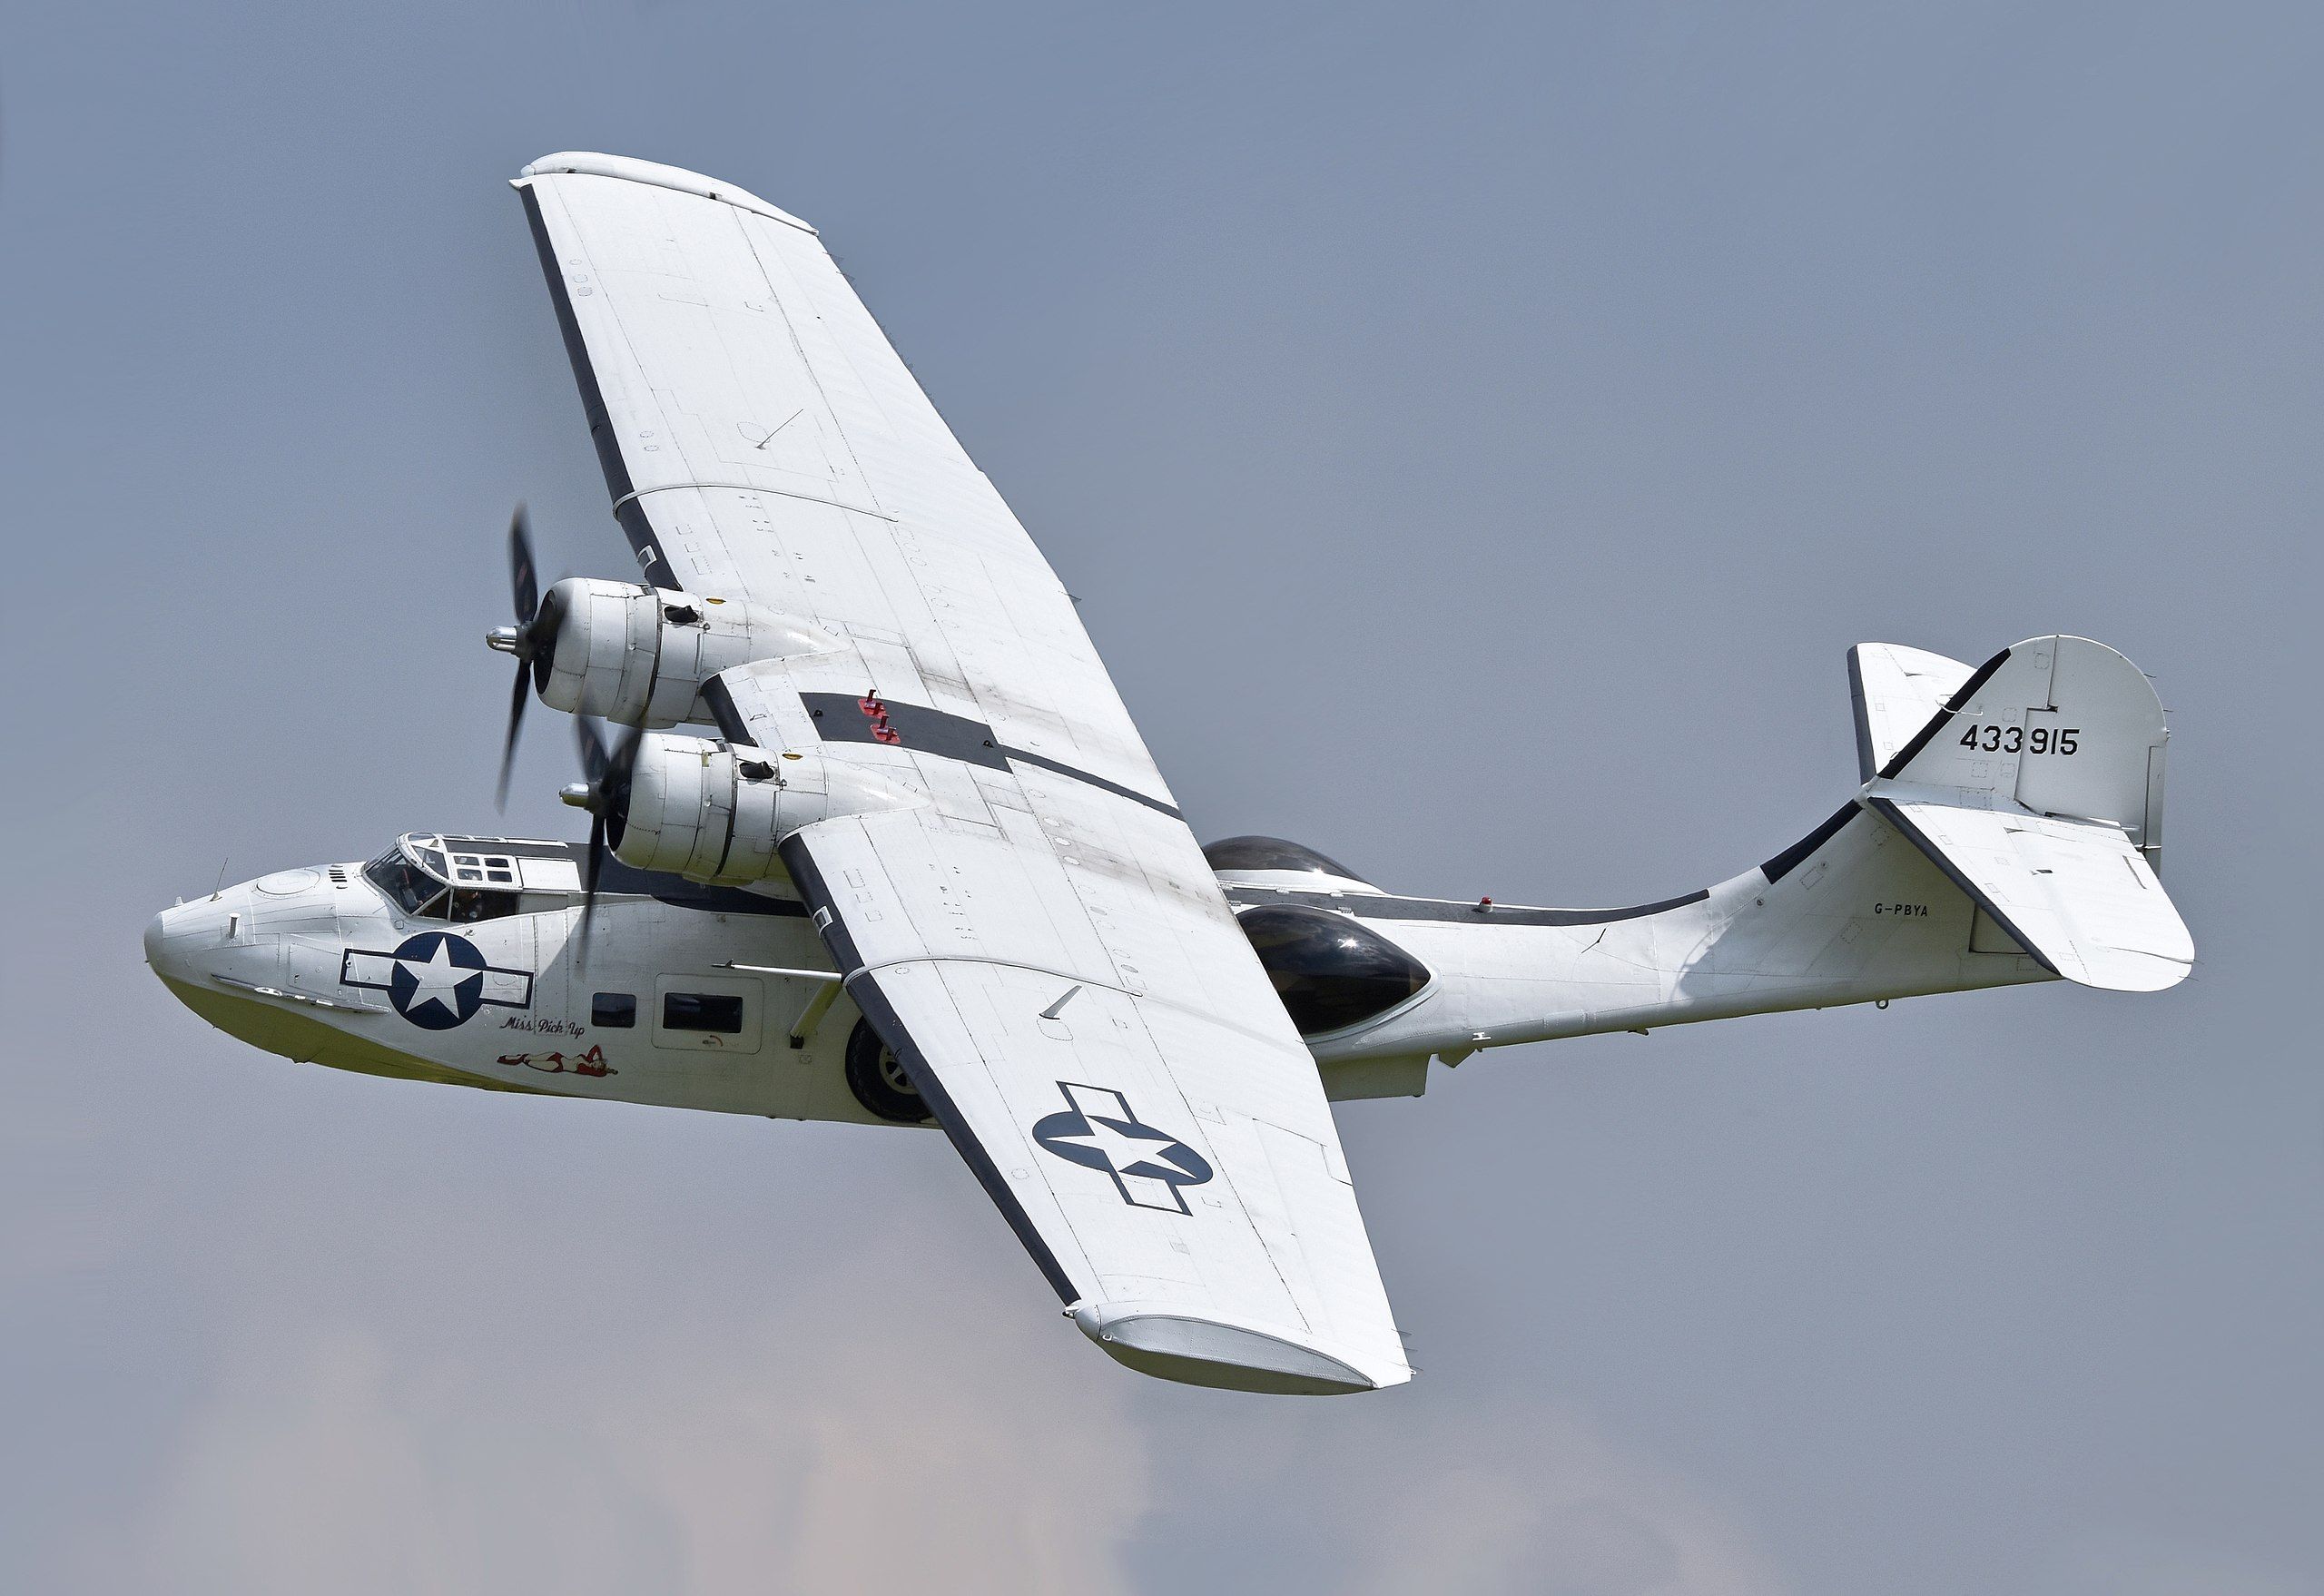 A Catalina flying boat flying in the sky.